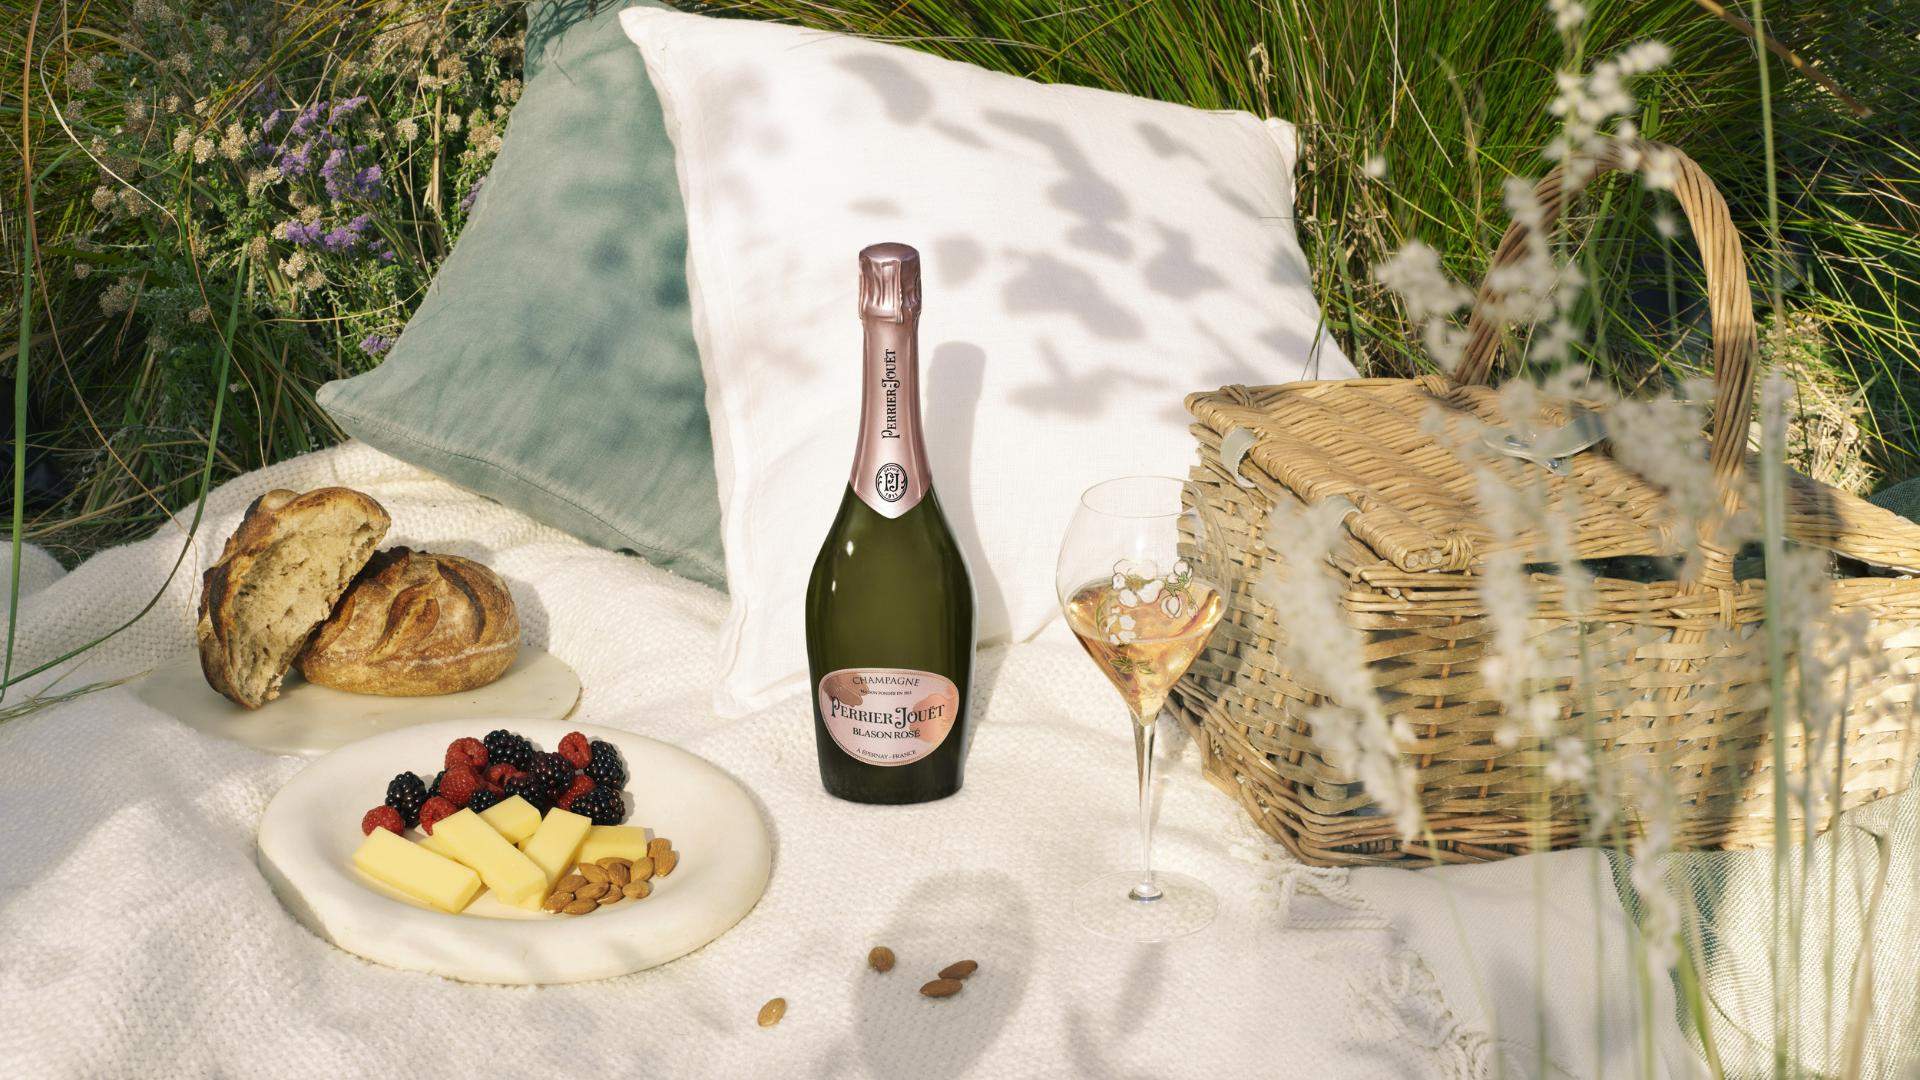 Raise a Glass to Mum: Champagne-Fuelled Experiences to Spoil your Mum this Mother's Day